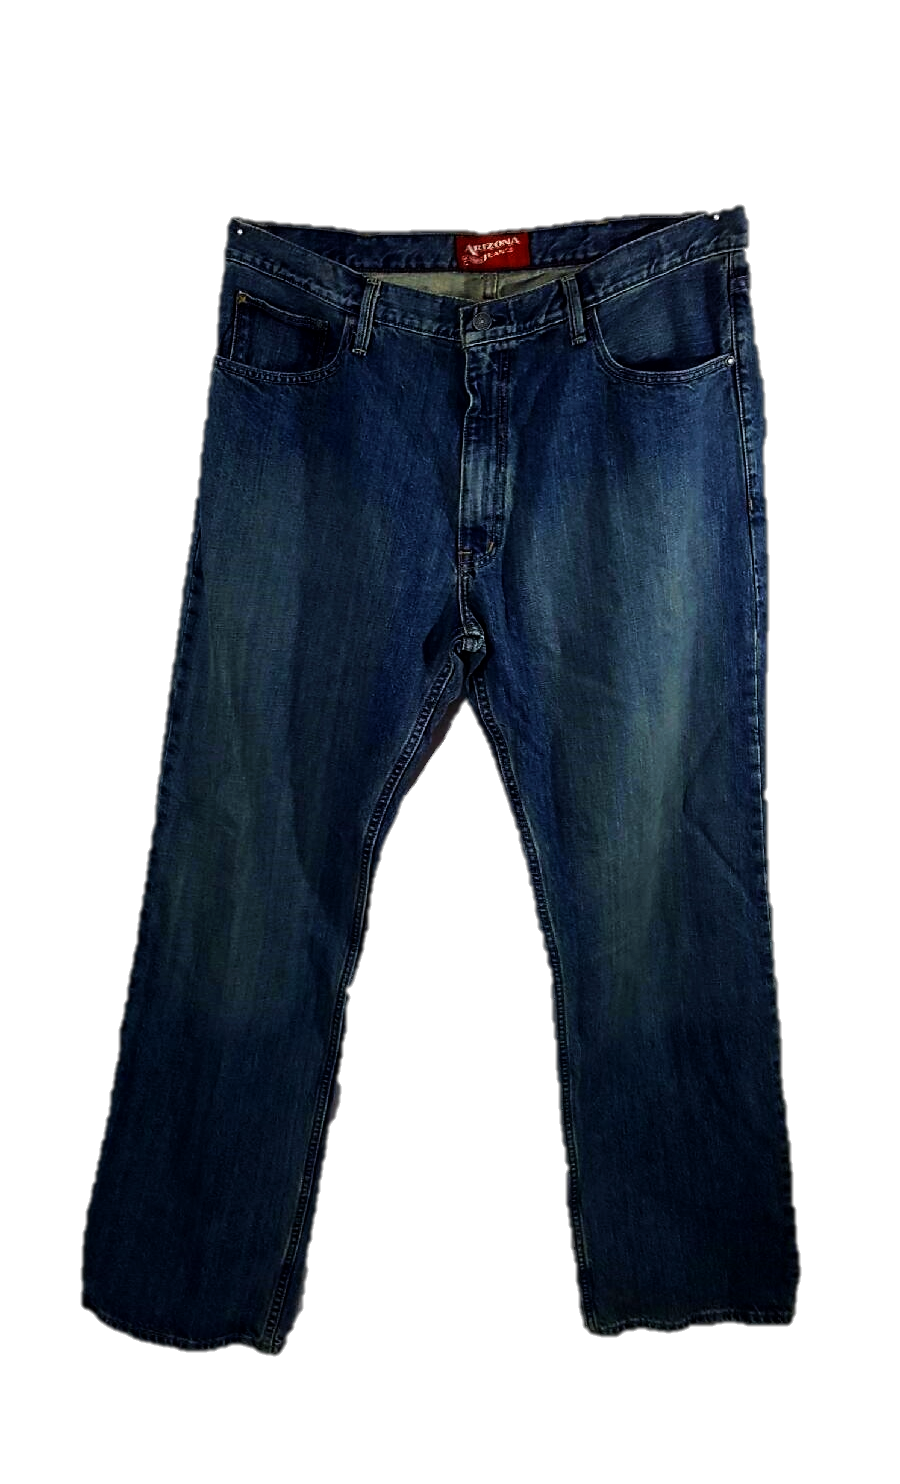 Guys Distressed Jeans